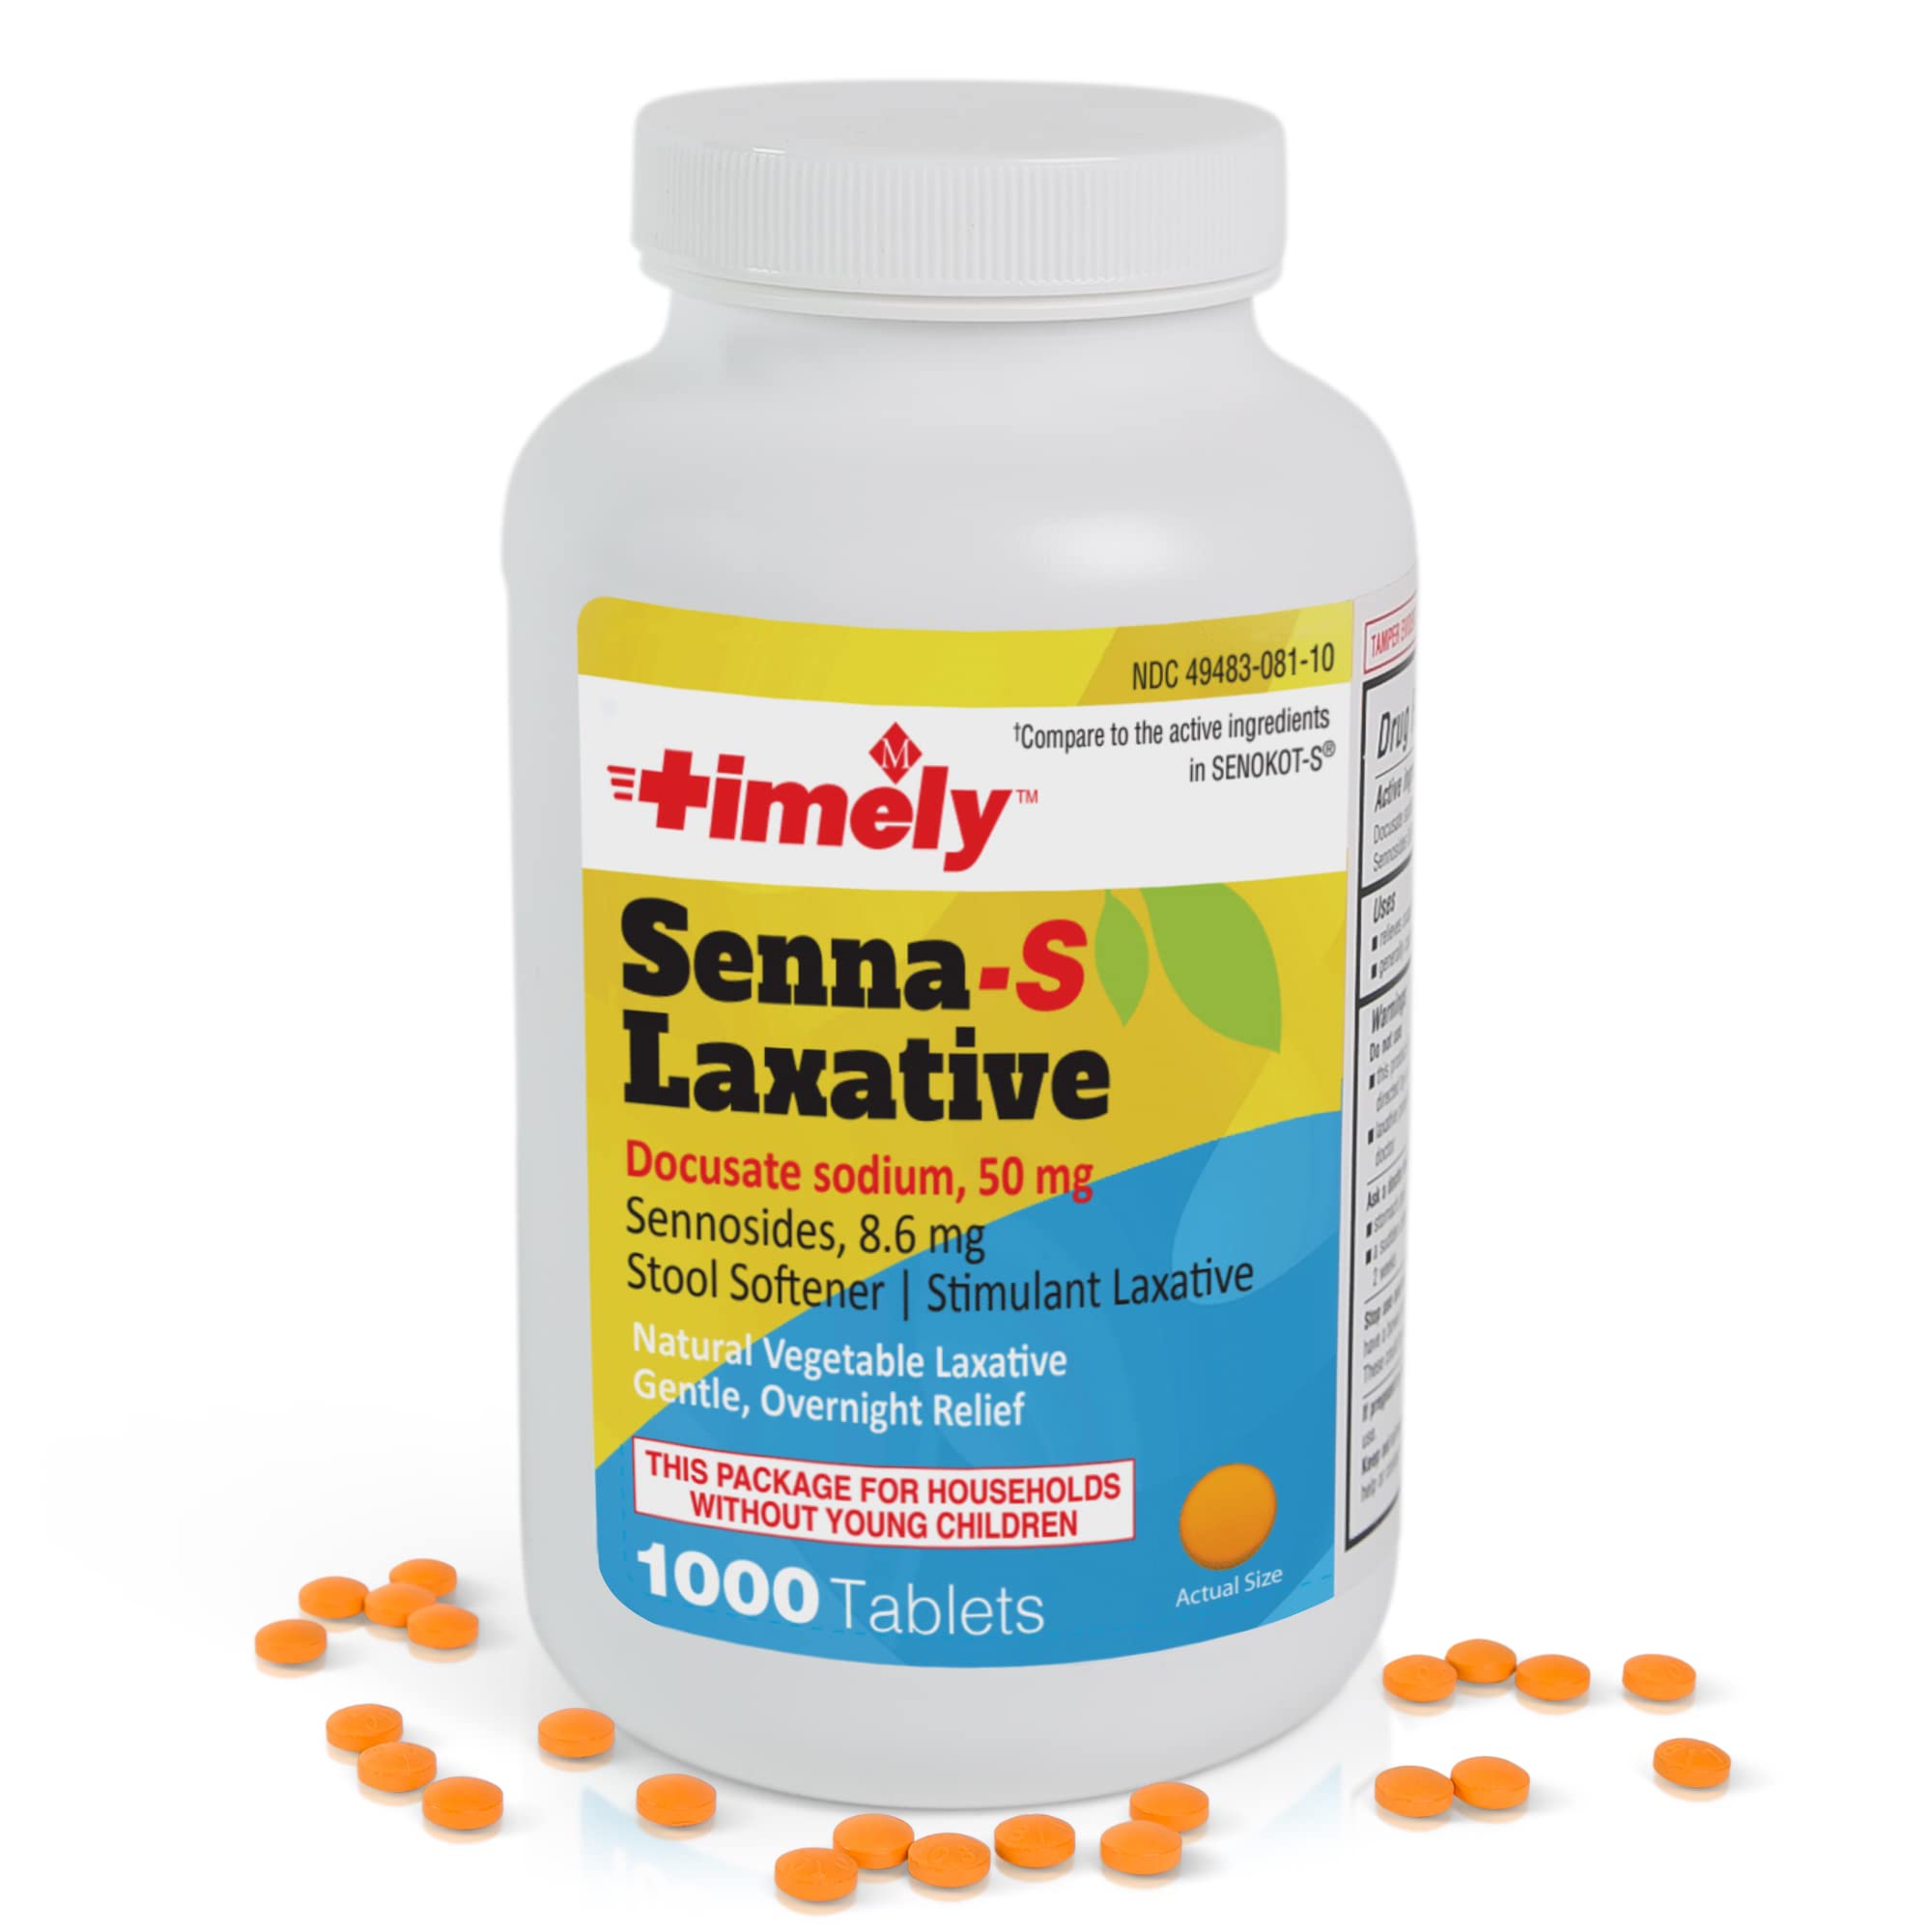 Timely by Time Cap Labs - Senna S Laxative - 1000 Count Tablets - Compared to The Active Ingredients in Senokot-S - Natural Vegetable Based Laxative for Constipation Relief - Gentle Overnight Relief